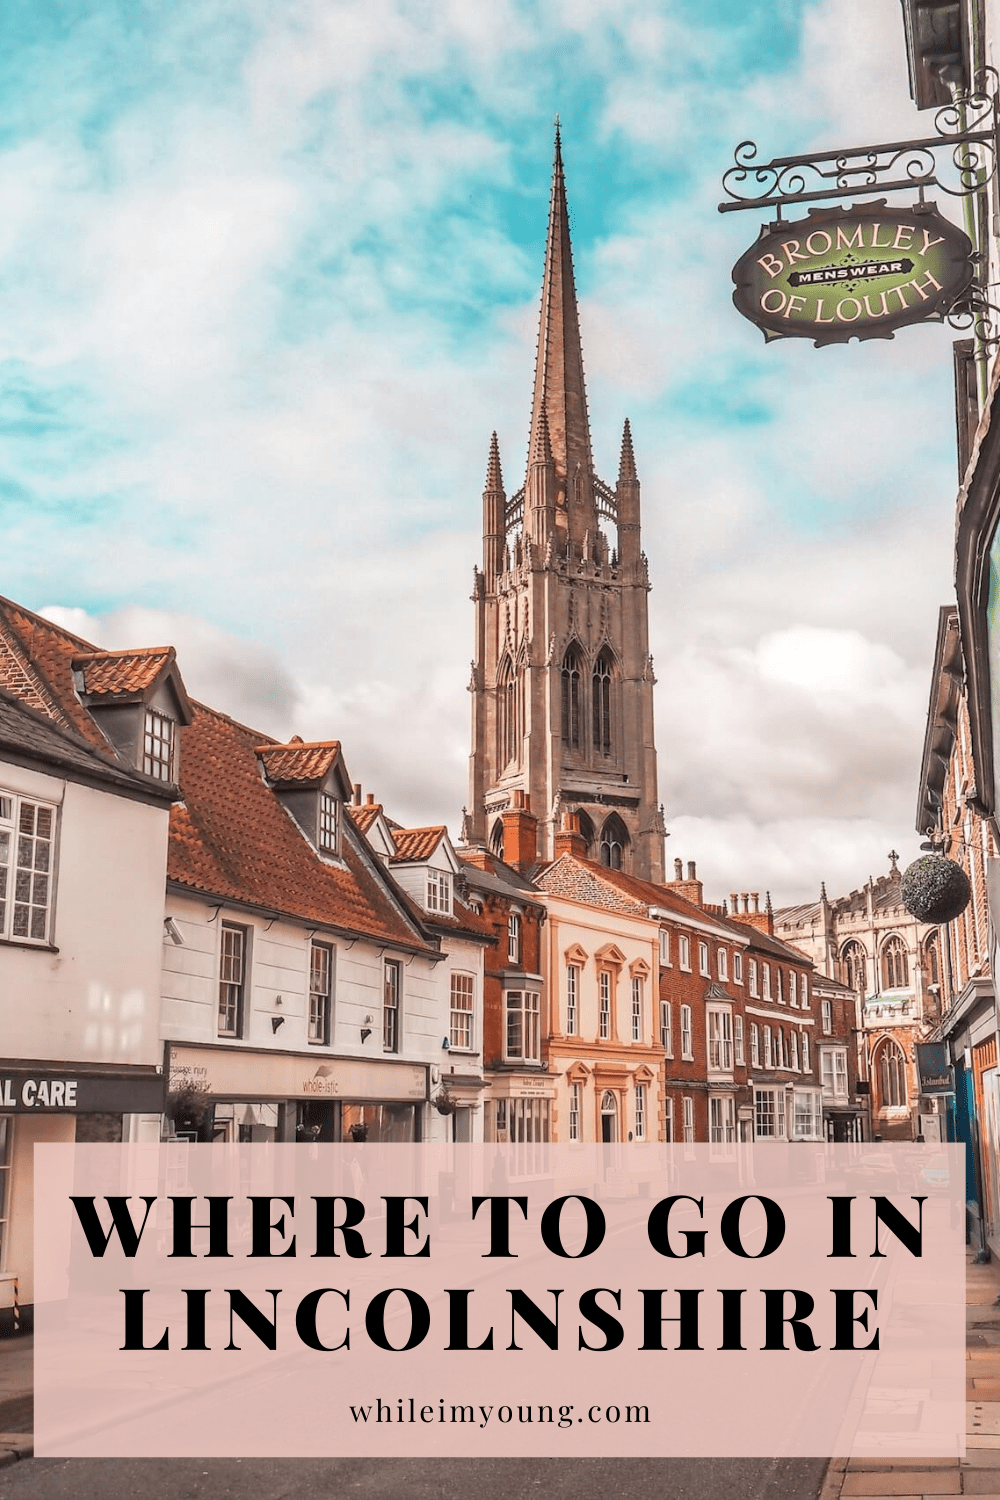 Where to go in Lincolnshire